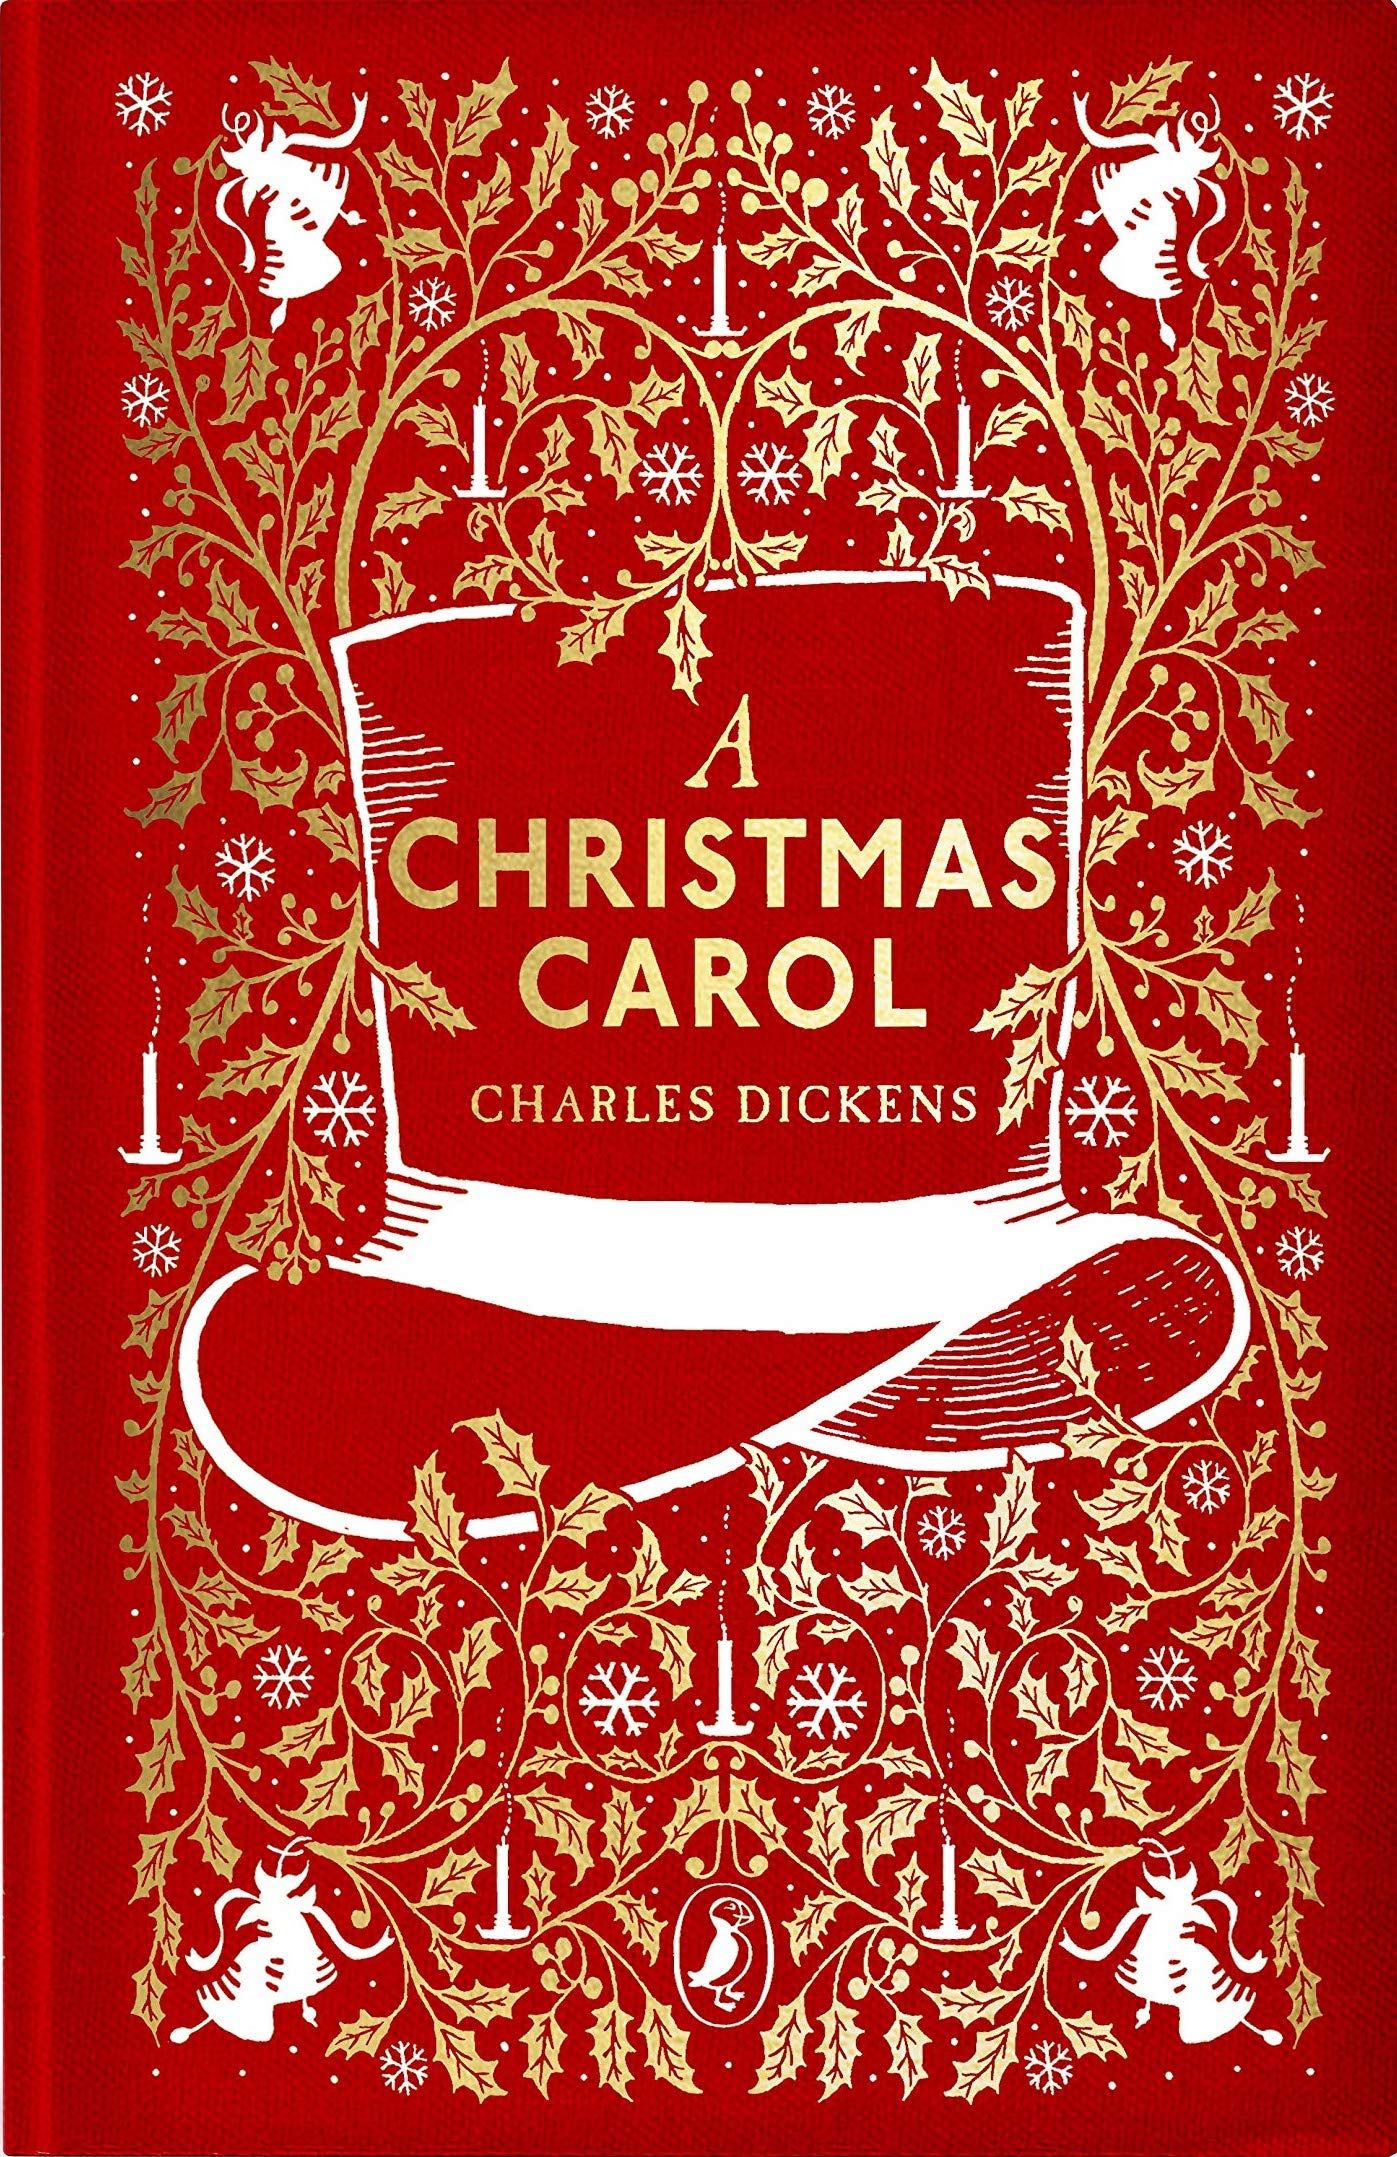 the cover of A Christmas Carol, featuring a top hat